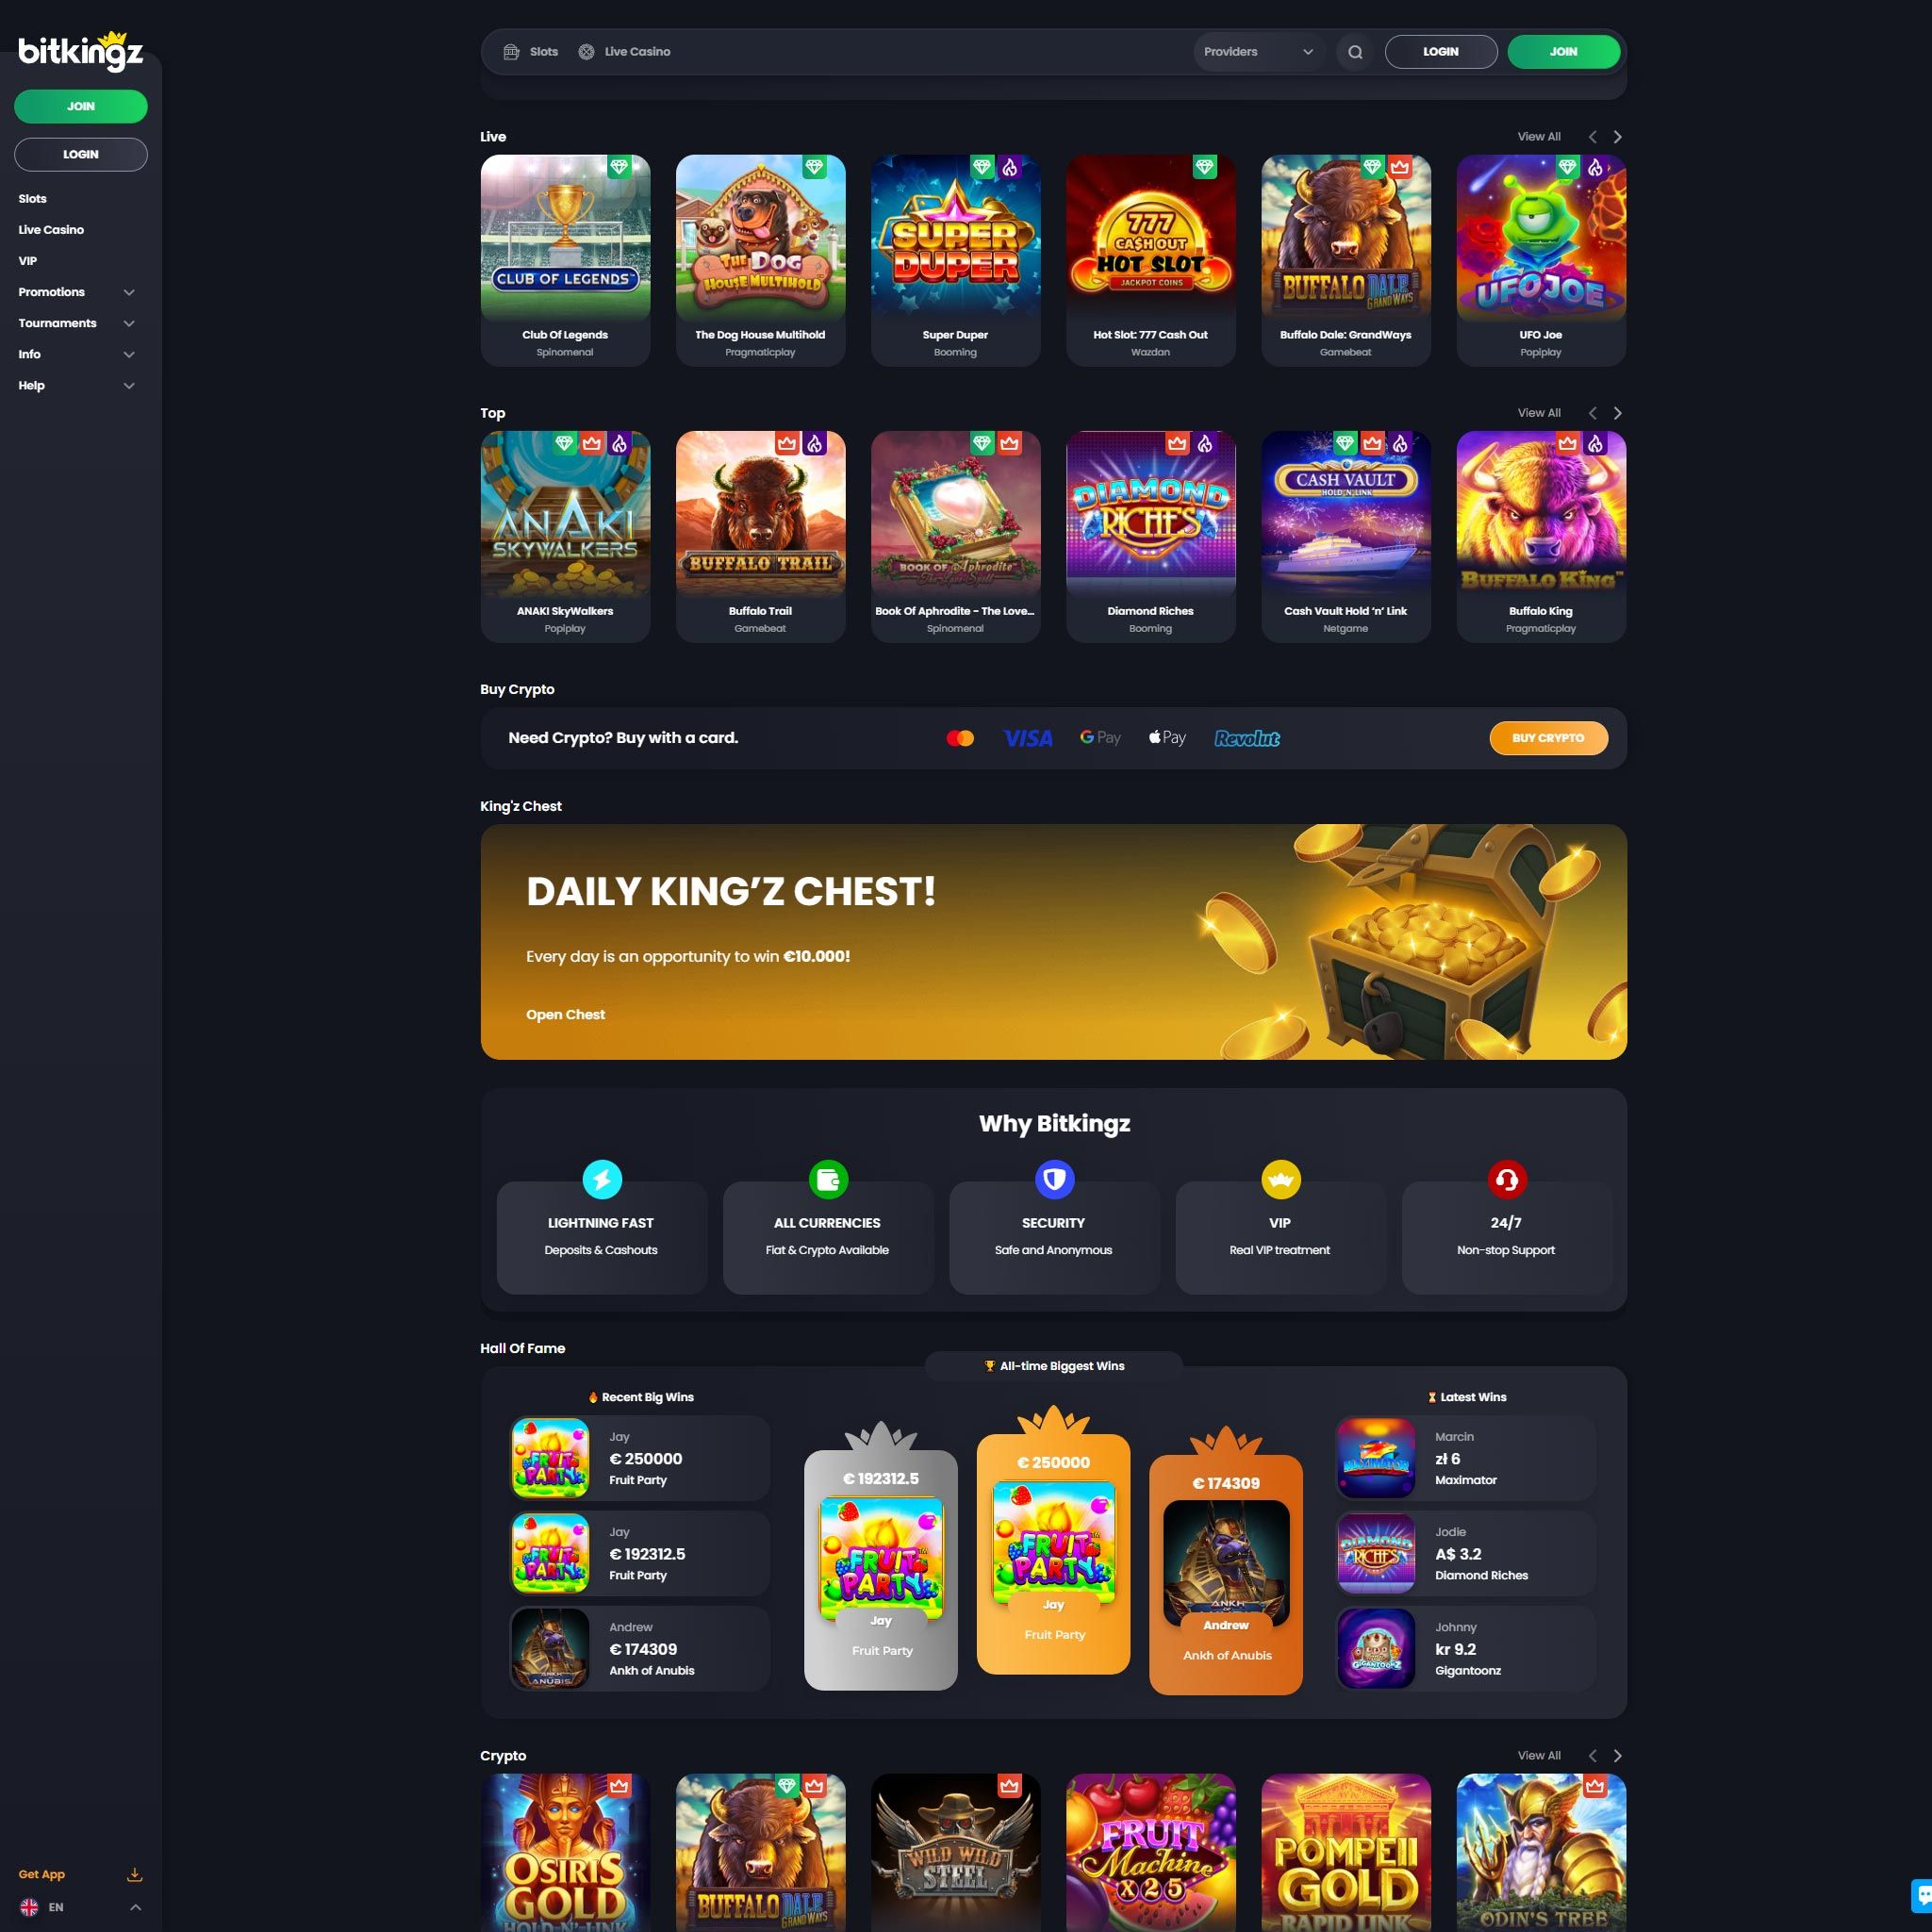 Bitkingz Casino review by Mr. Gamble